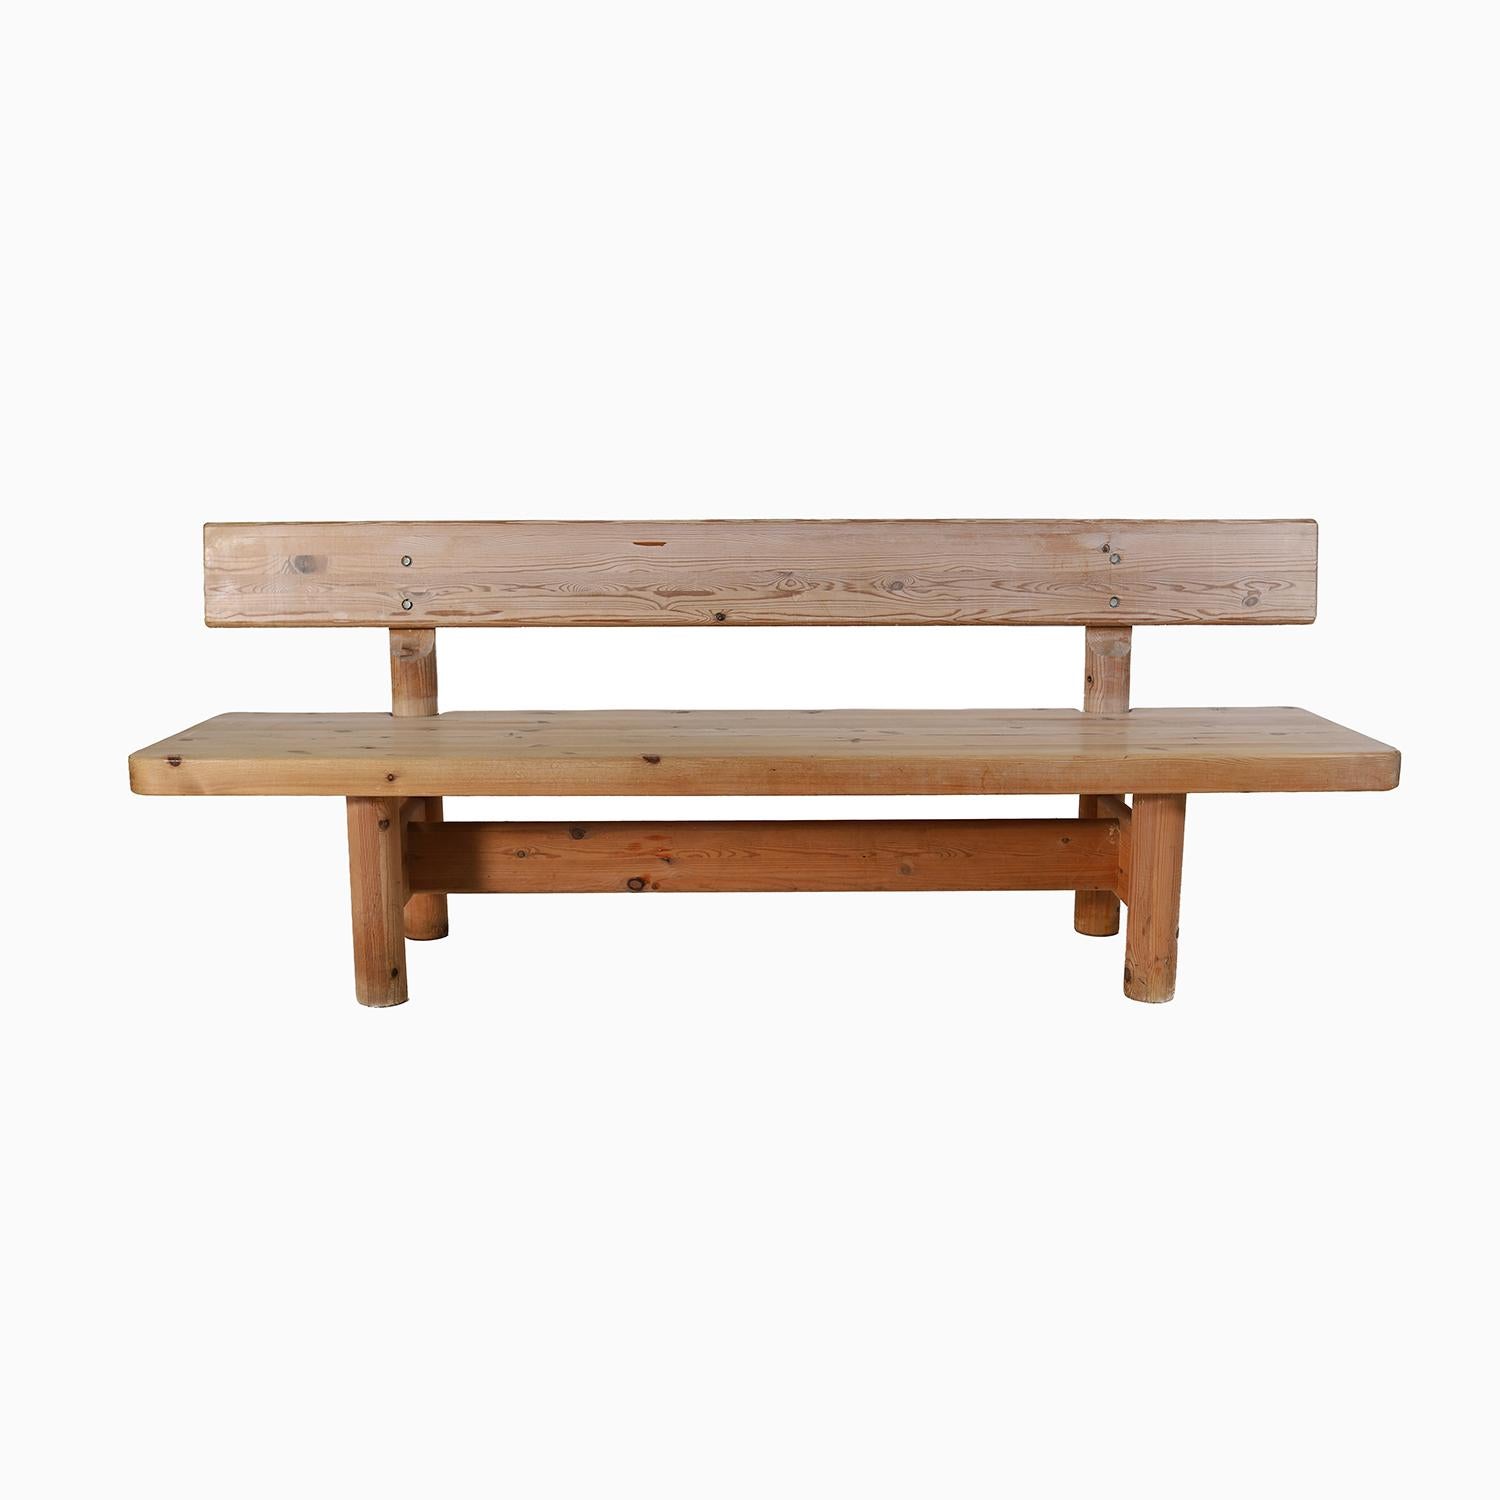 Abeautiful soaped pine bench designed by Danish architects Knud Fiis & Elmar Moltke-Nielsen for Hirtshals Savvaerk.

Professional, skilled furniture restoration is an integral part of what we do every day. Our goal 
is to provide beautiful,